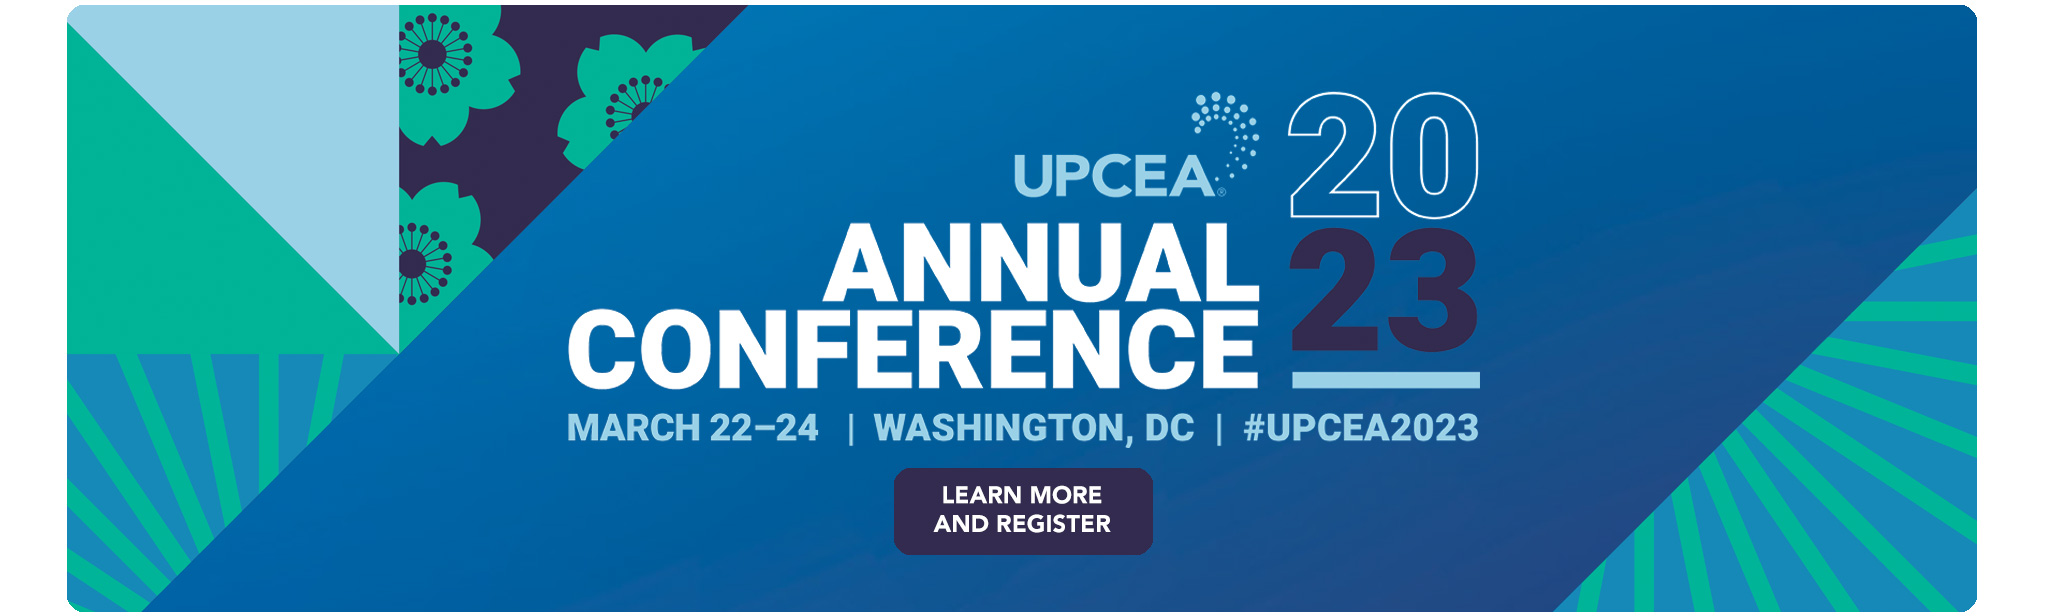 2023 UPCEA Annual Conference | March 22-24, 2023 | Washington, DC | Register and join us!